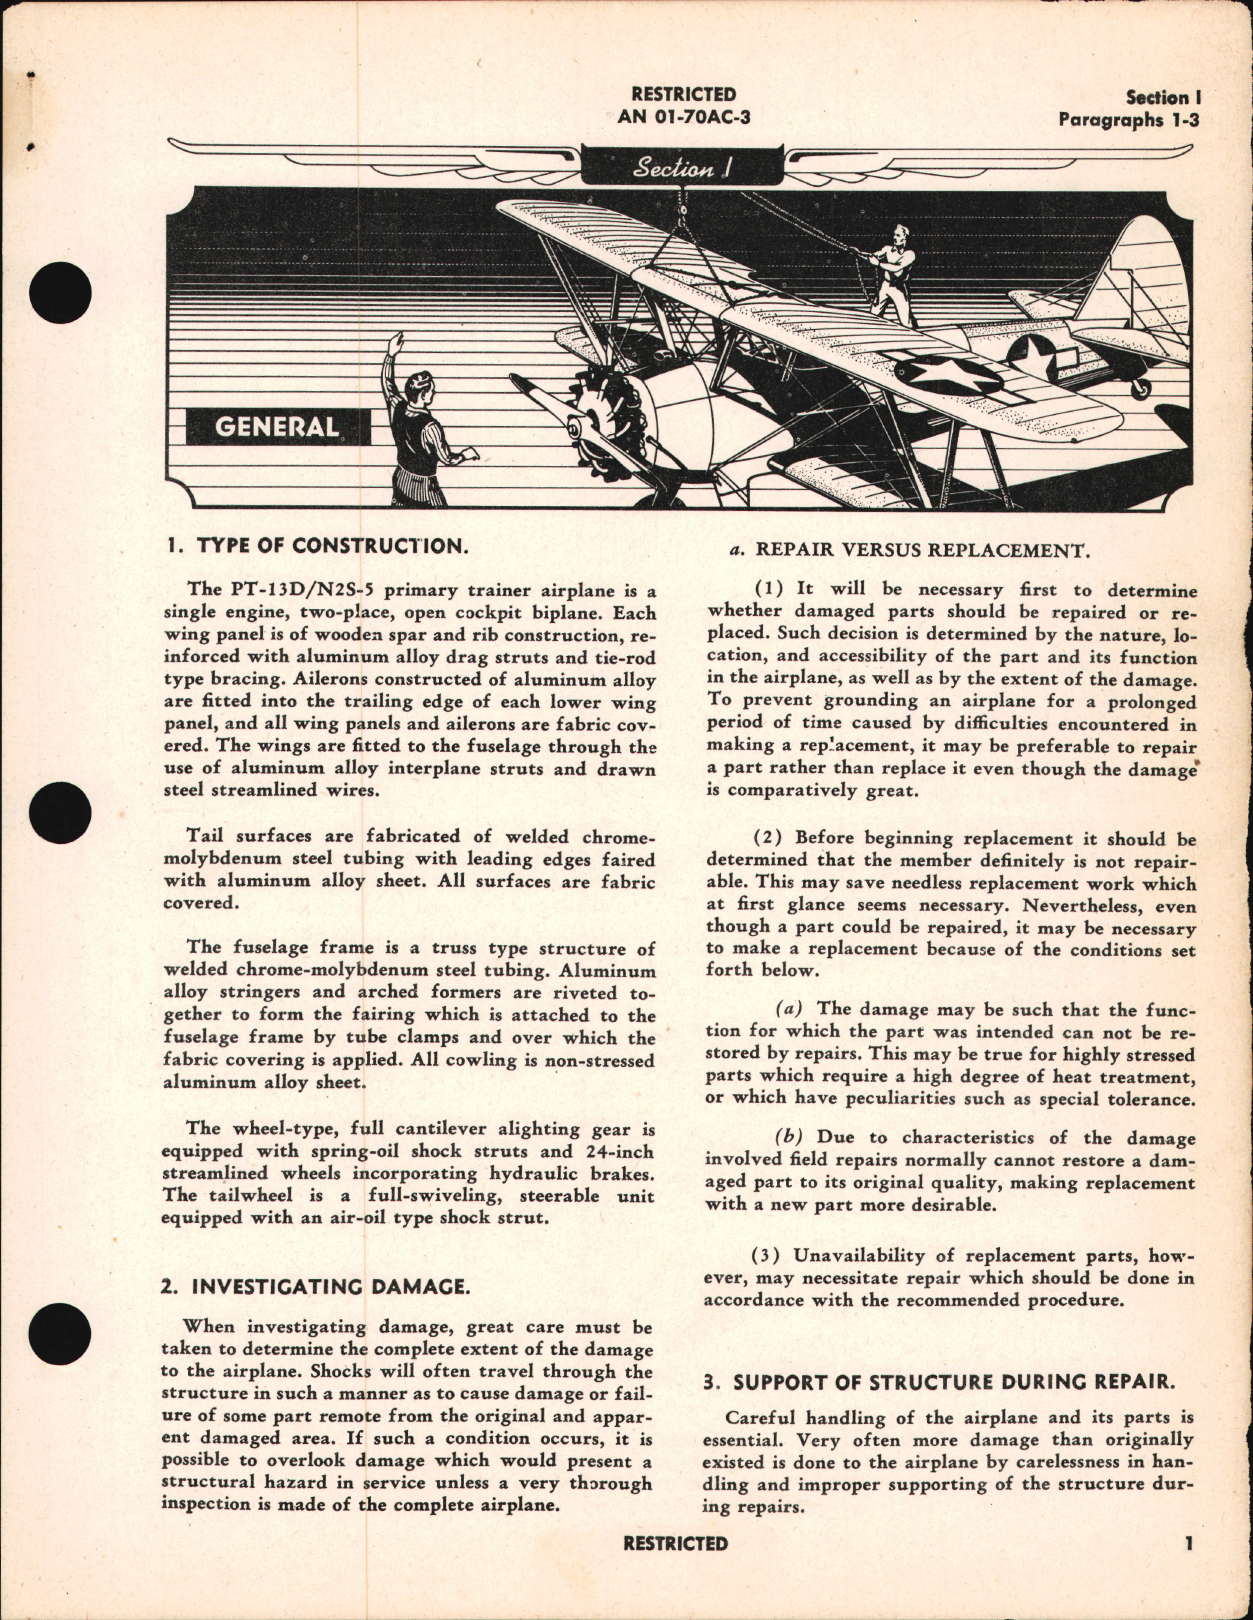 Sample page 5 from AirCorps Library document: Structural Repair Instructions for PT-13D and N2S-5